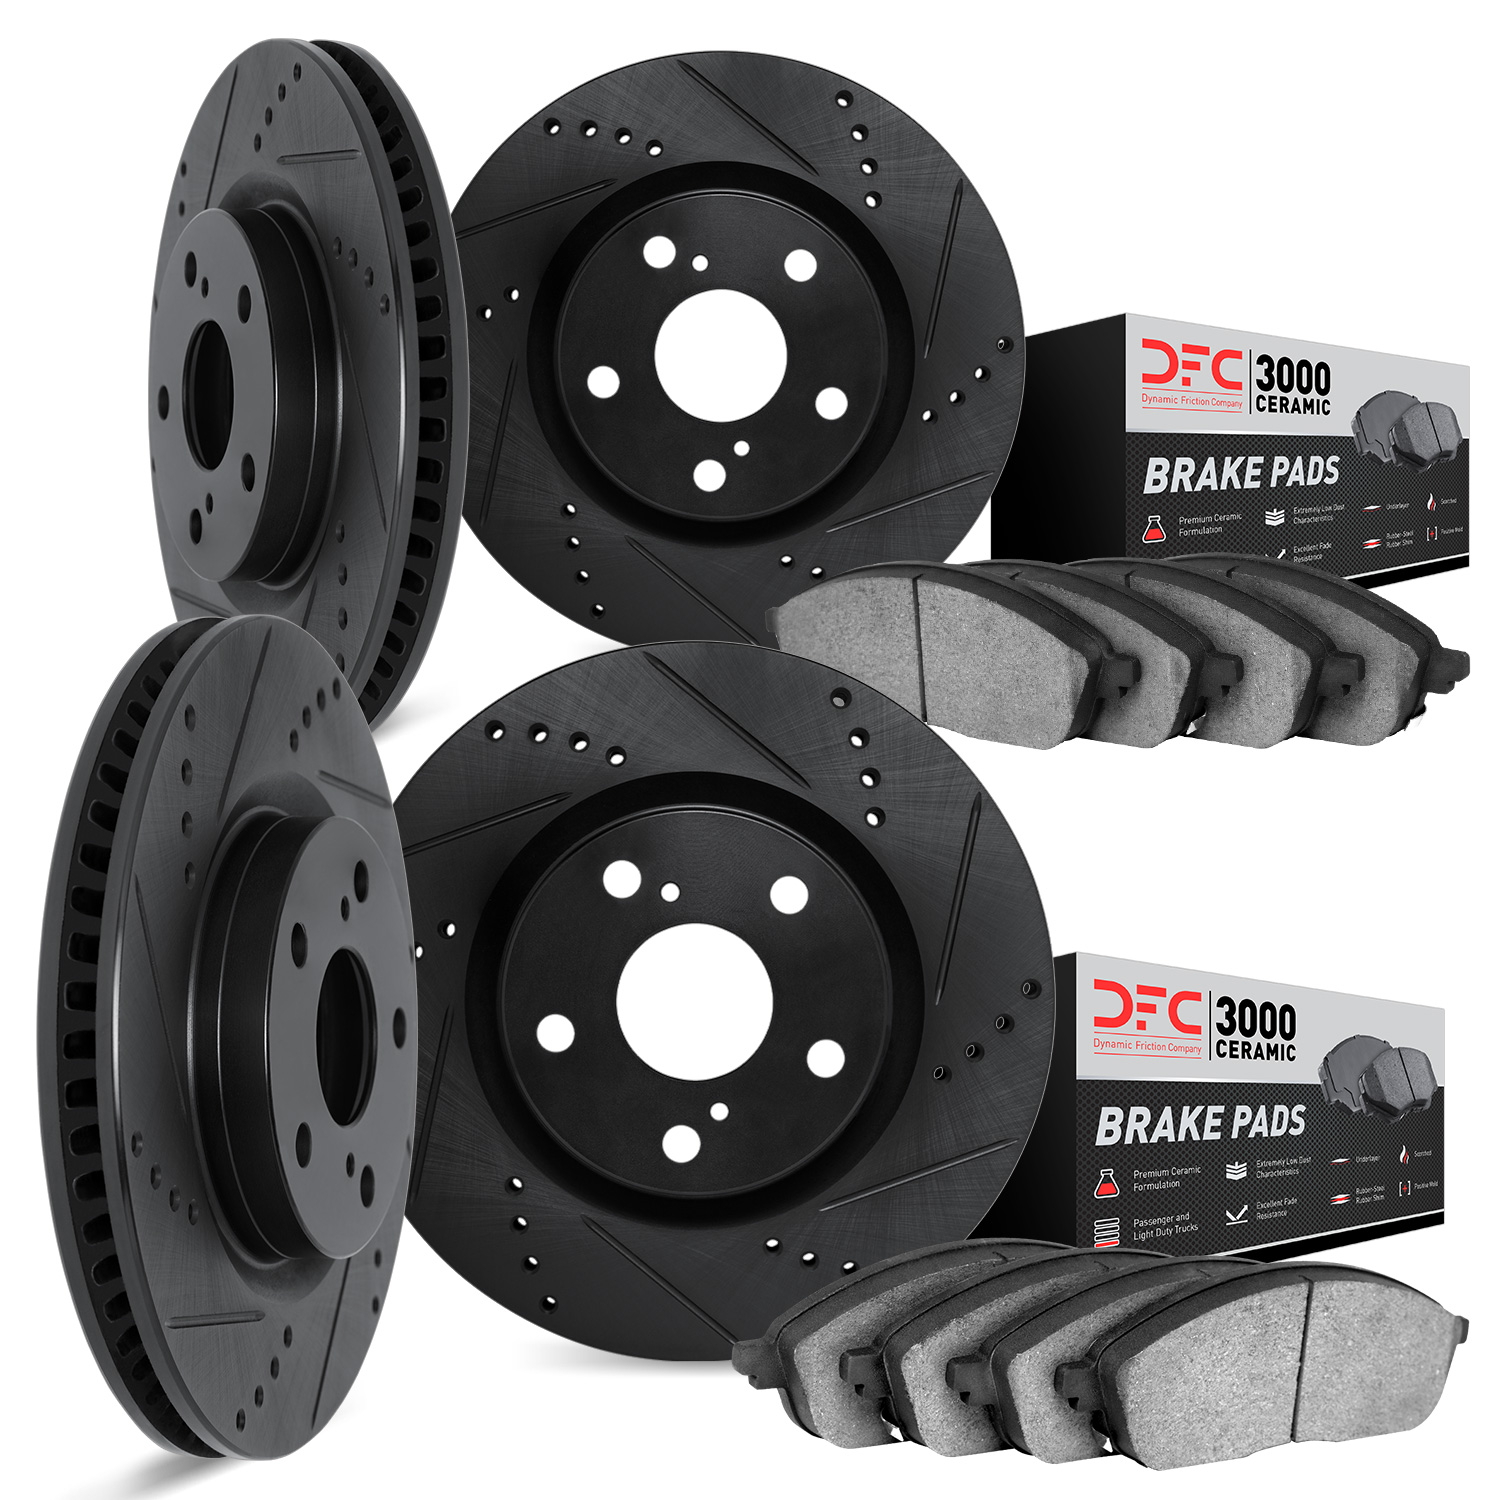 8304-31047 Drilled/Slotted Brake Rotors with 3000-Series Ceramic Brake Pads Kit [Black], 2002-2005 BMW, Position: Front and Rear